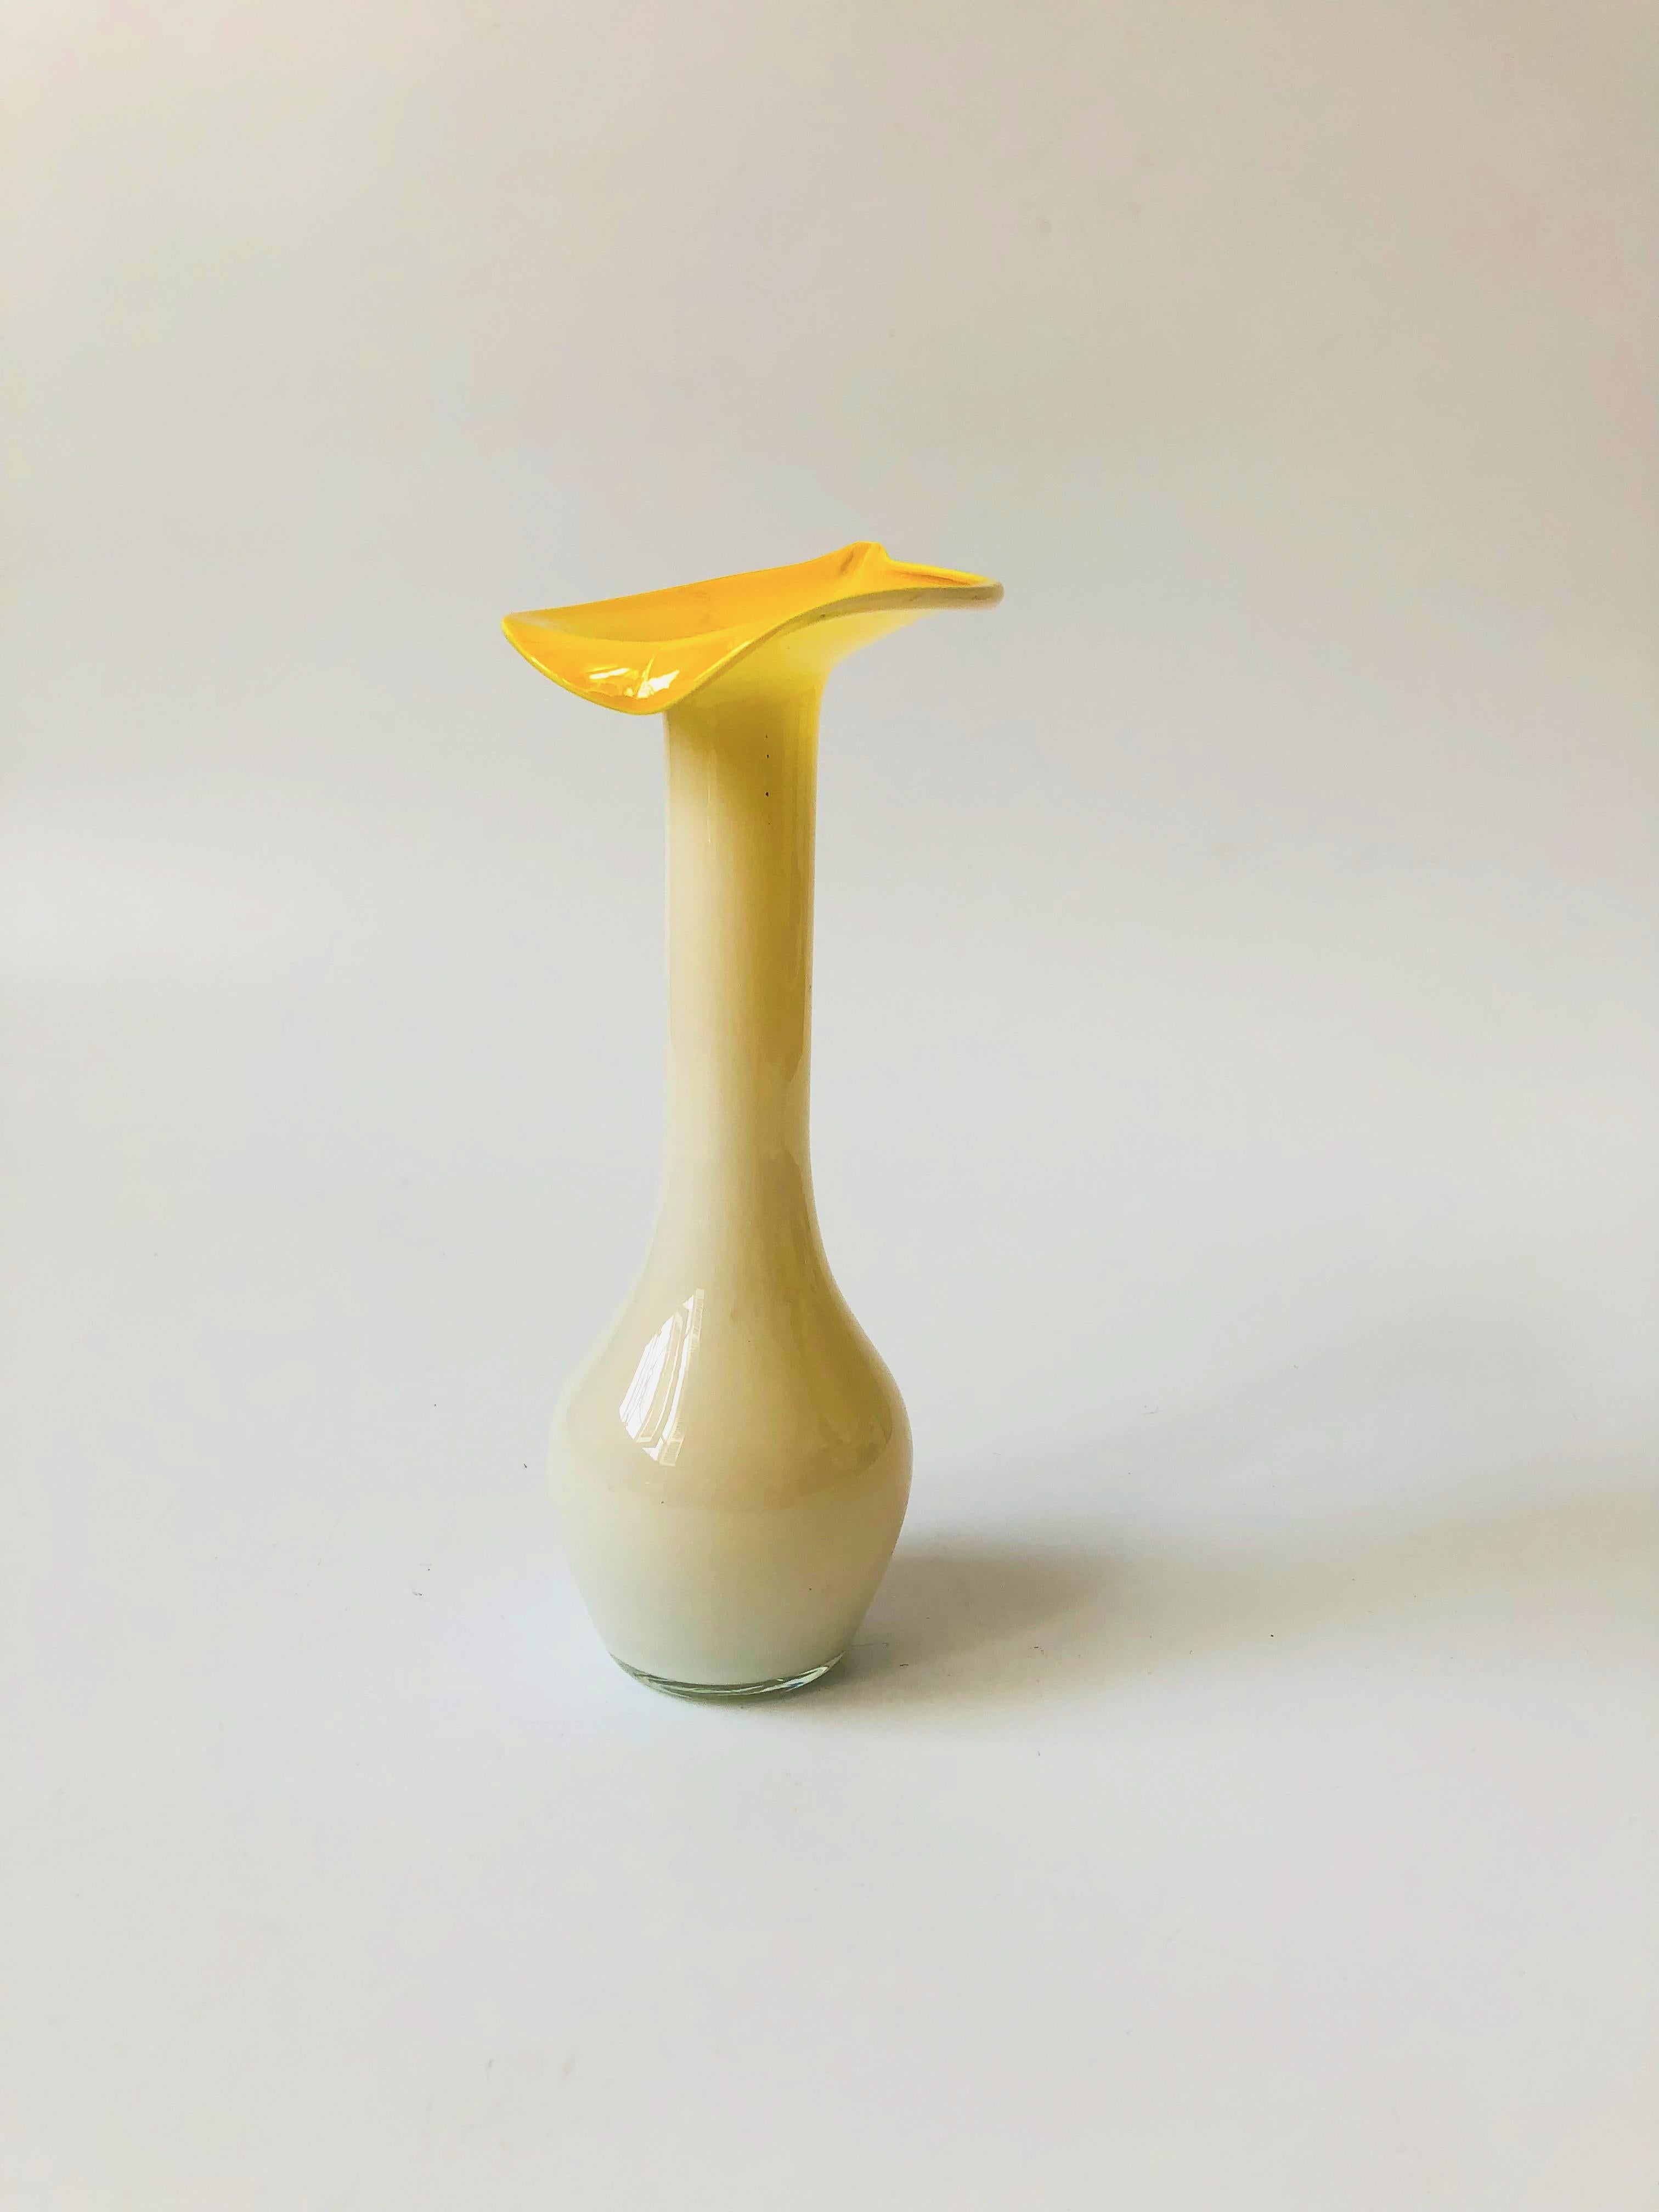 A beautiful vintage art glass vase in the shape of a lily. Lovely opaque white milk glass encases a bright yellow interior.
  